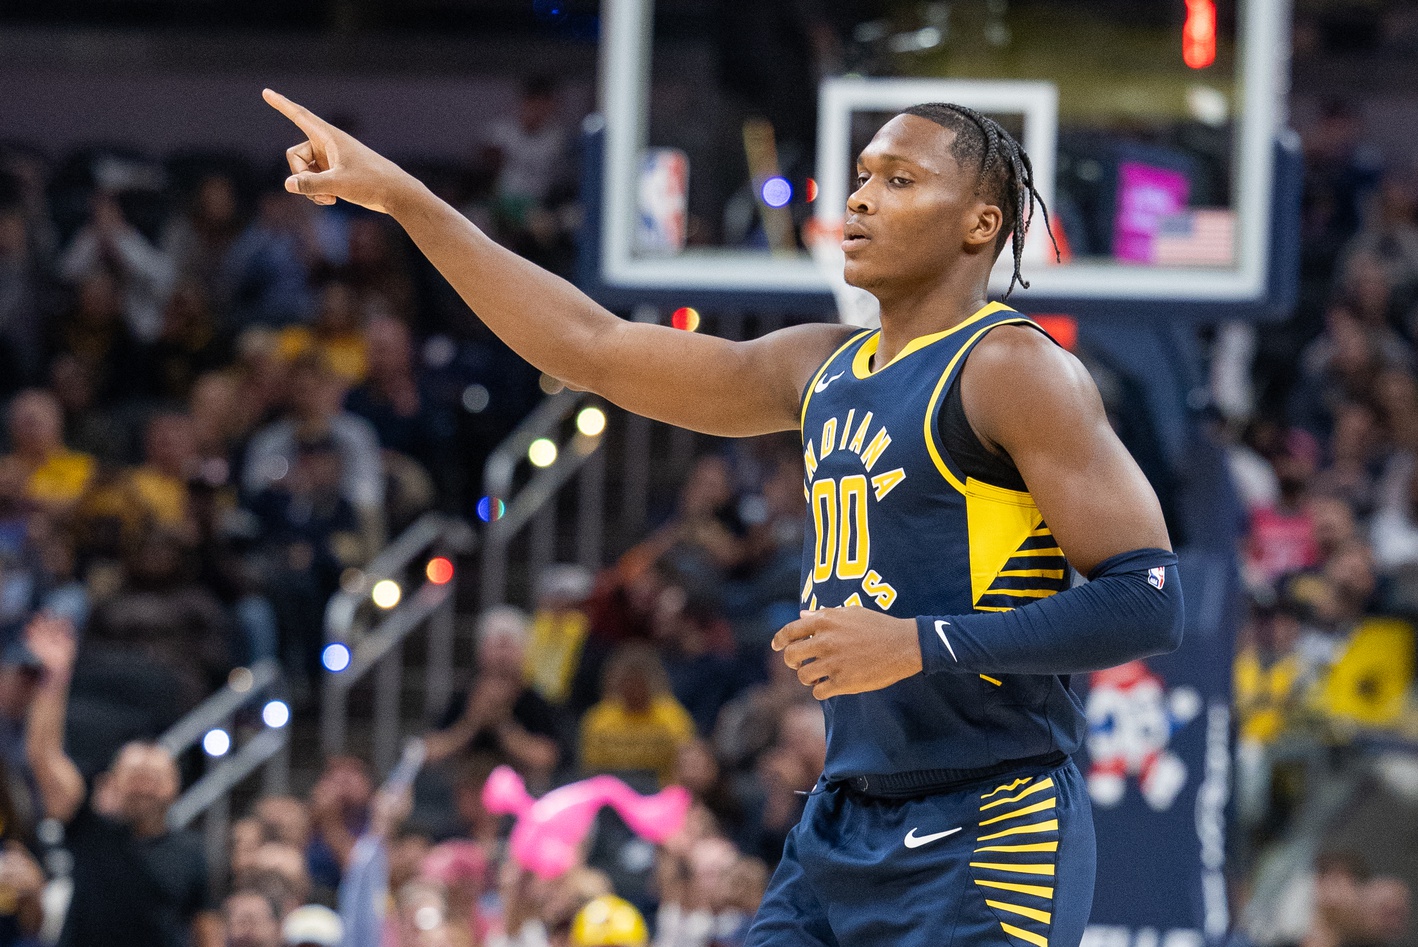 Oct 25, 2023; Indianapolis, Indiana, USA; Indiana Pacers guard Bennedict Mathurin (00) celebrates a made three pointer in the second half against the Washington Wizards at Gainbridge Fieldhouse. Mandatory Credit: Trevor Ruszkowski-USA TODAY Sports